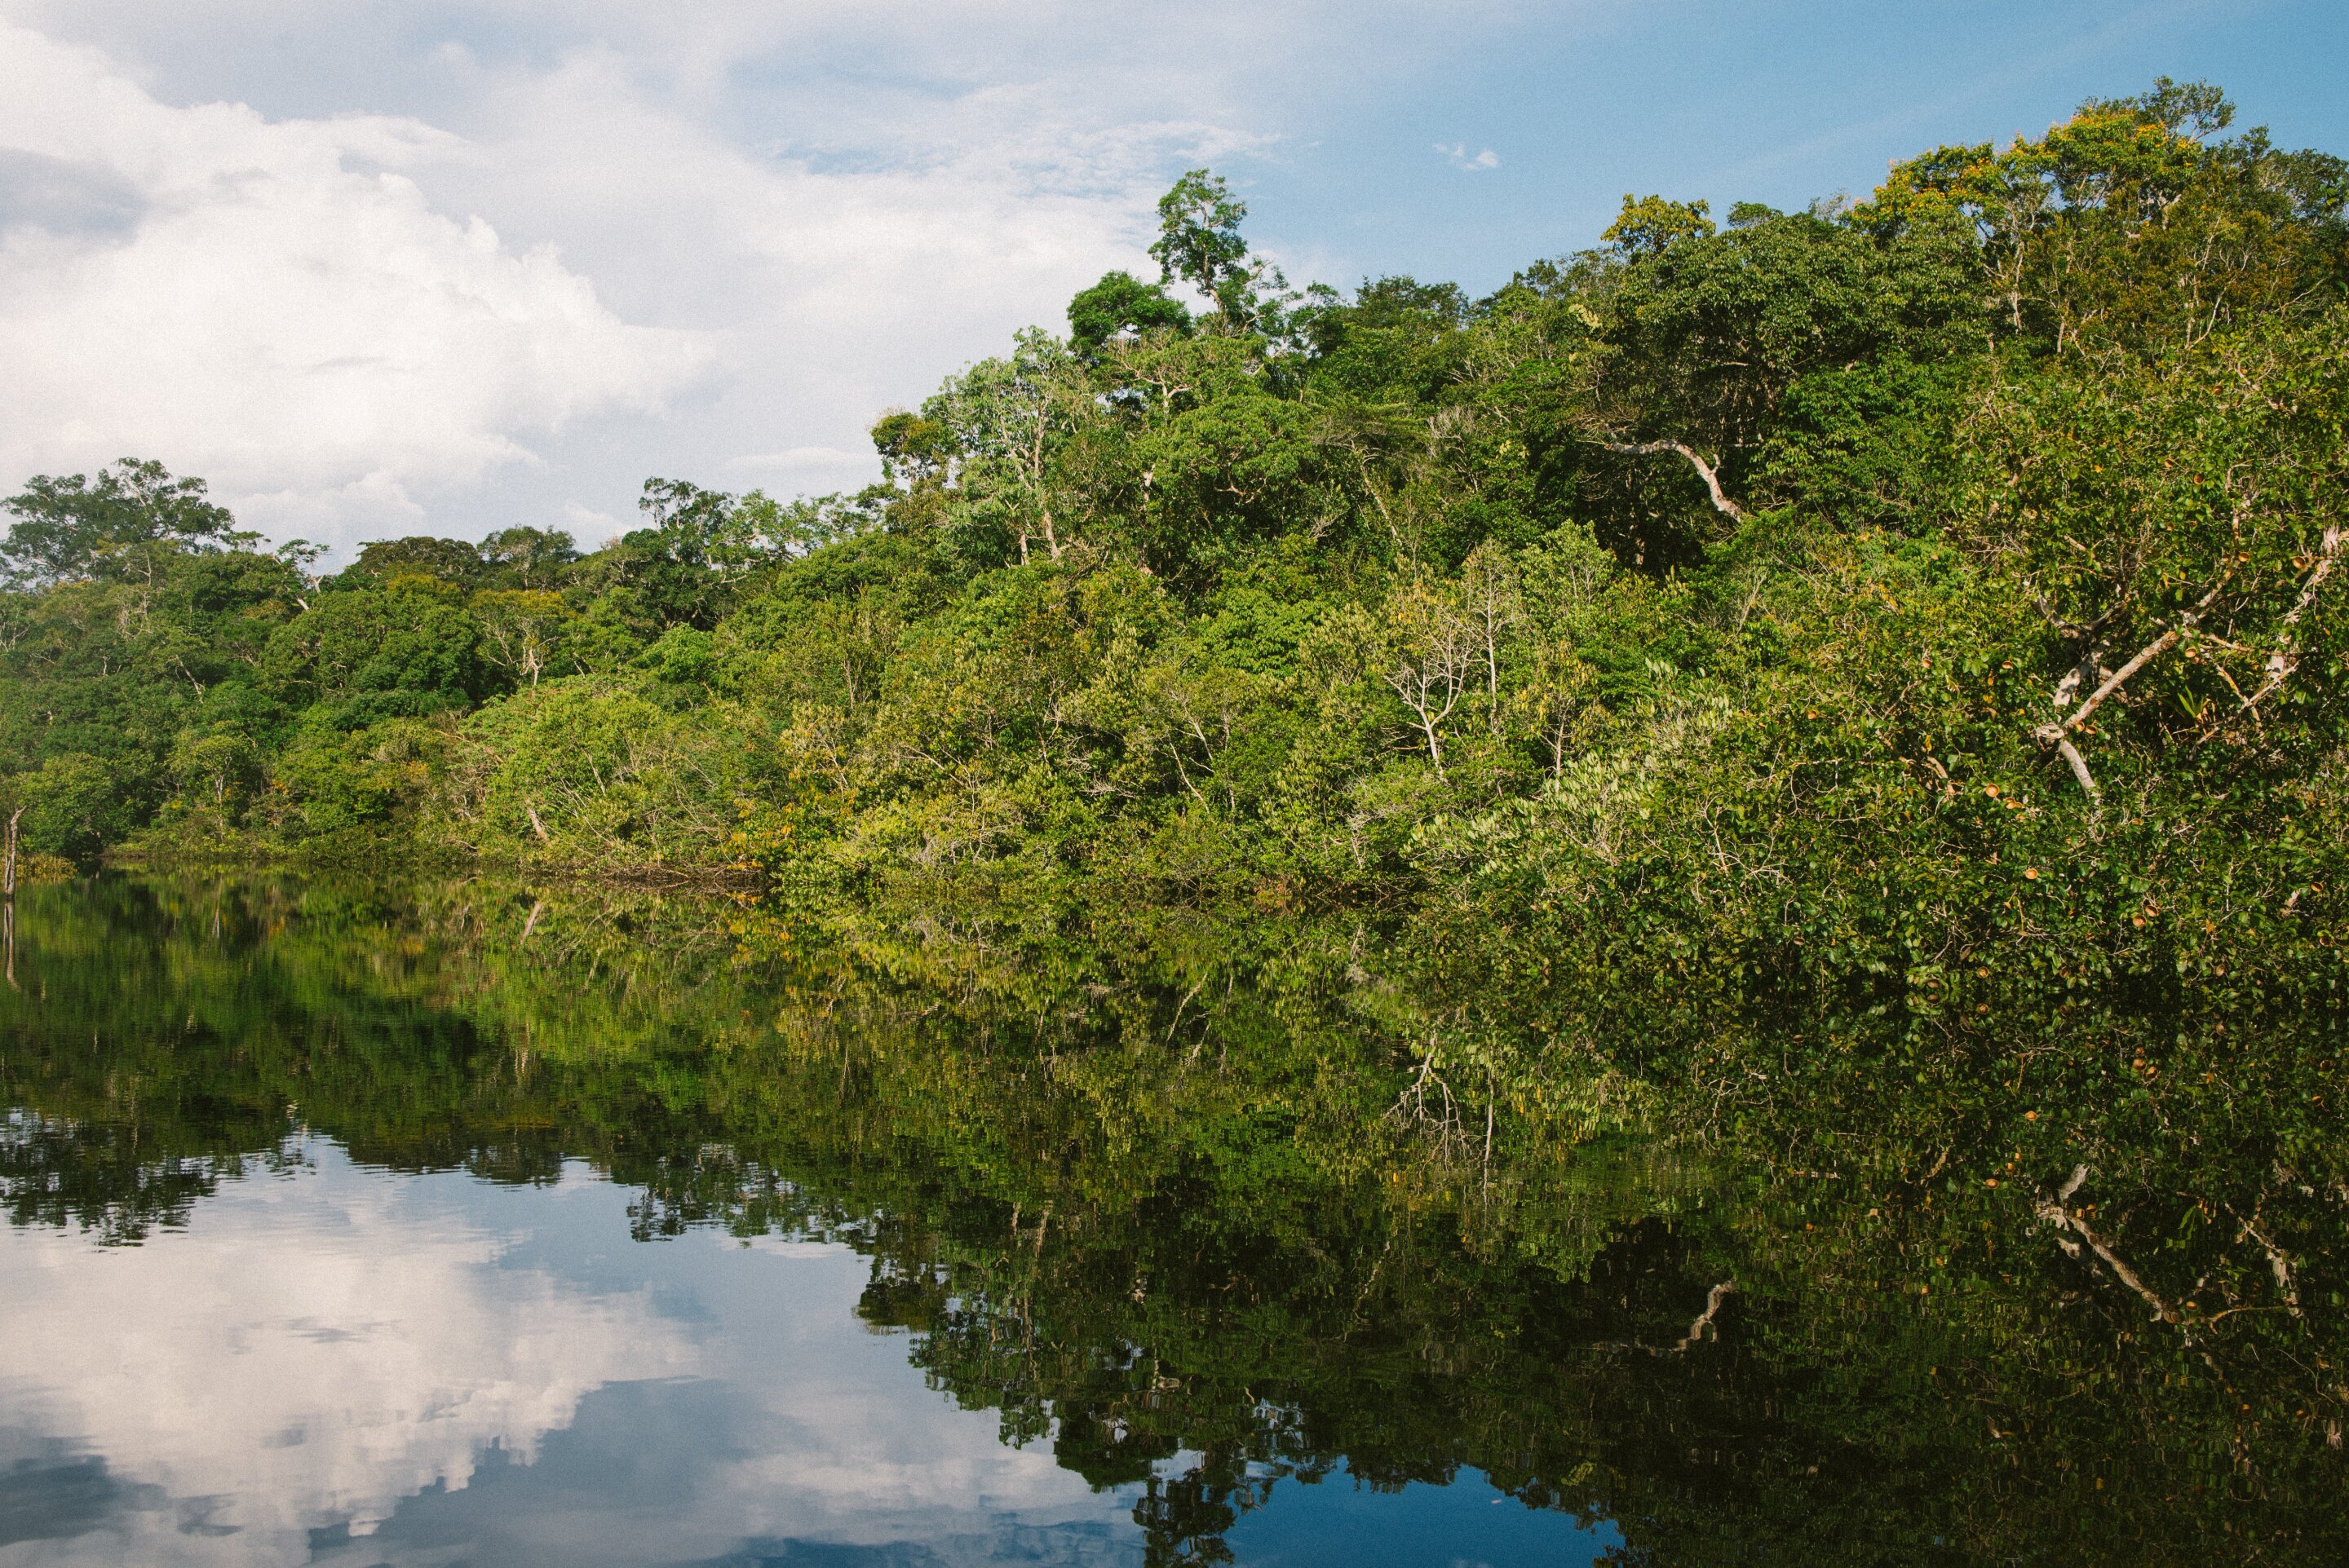 Scientists take a portable laboratory into the Amazon to study adaptation of trees to drought